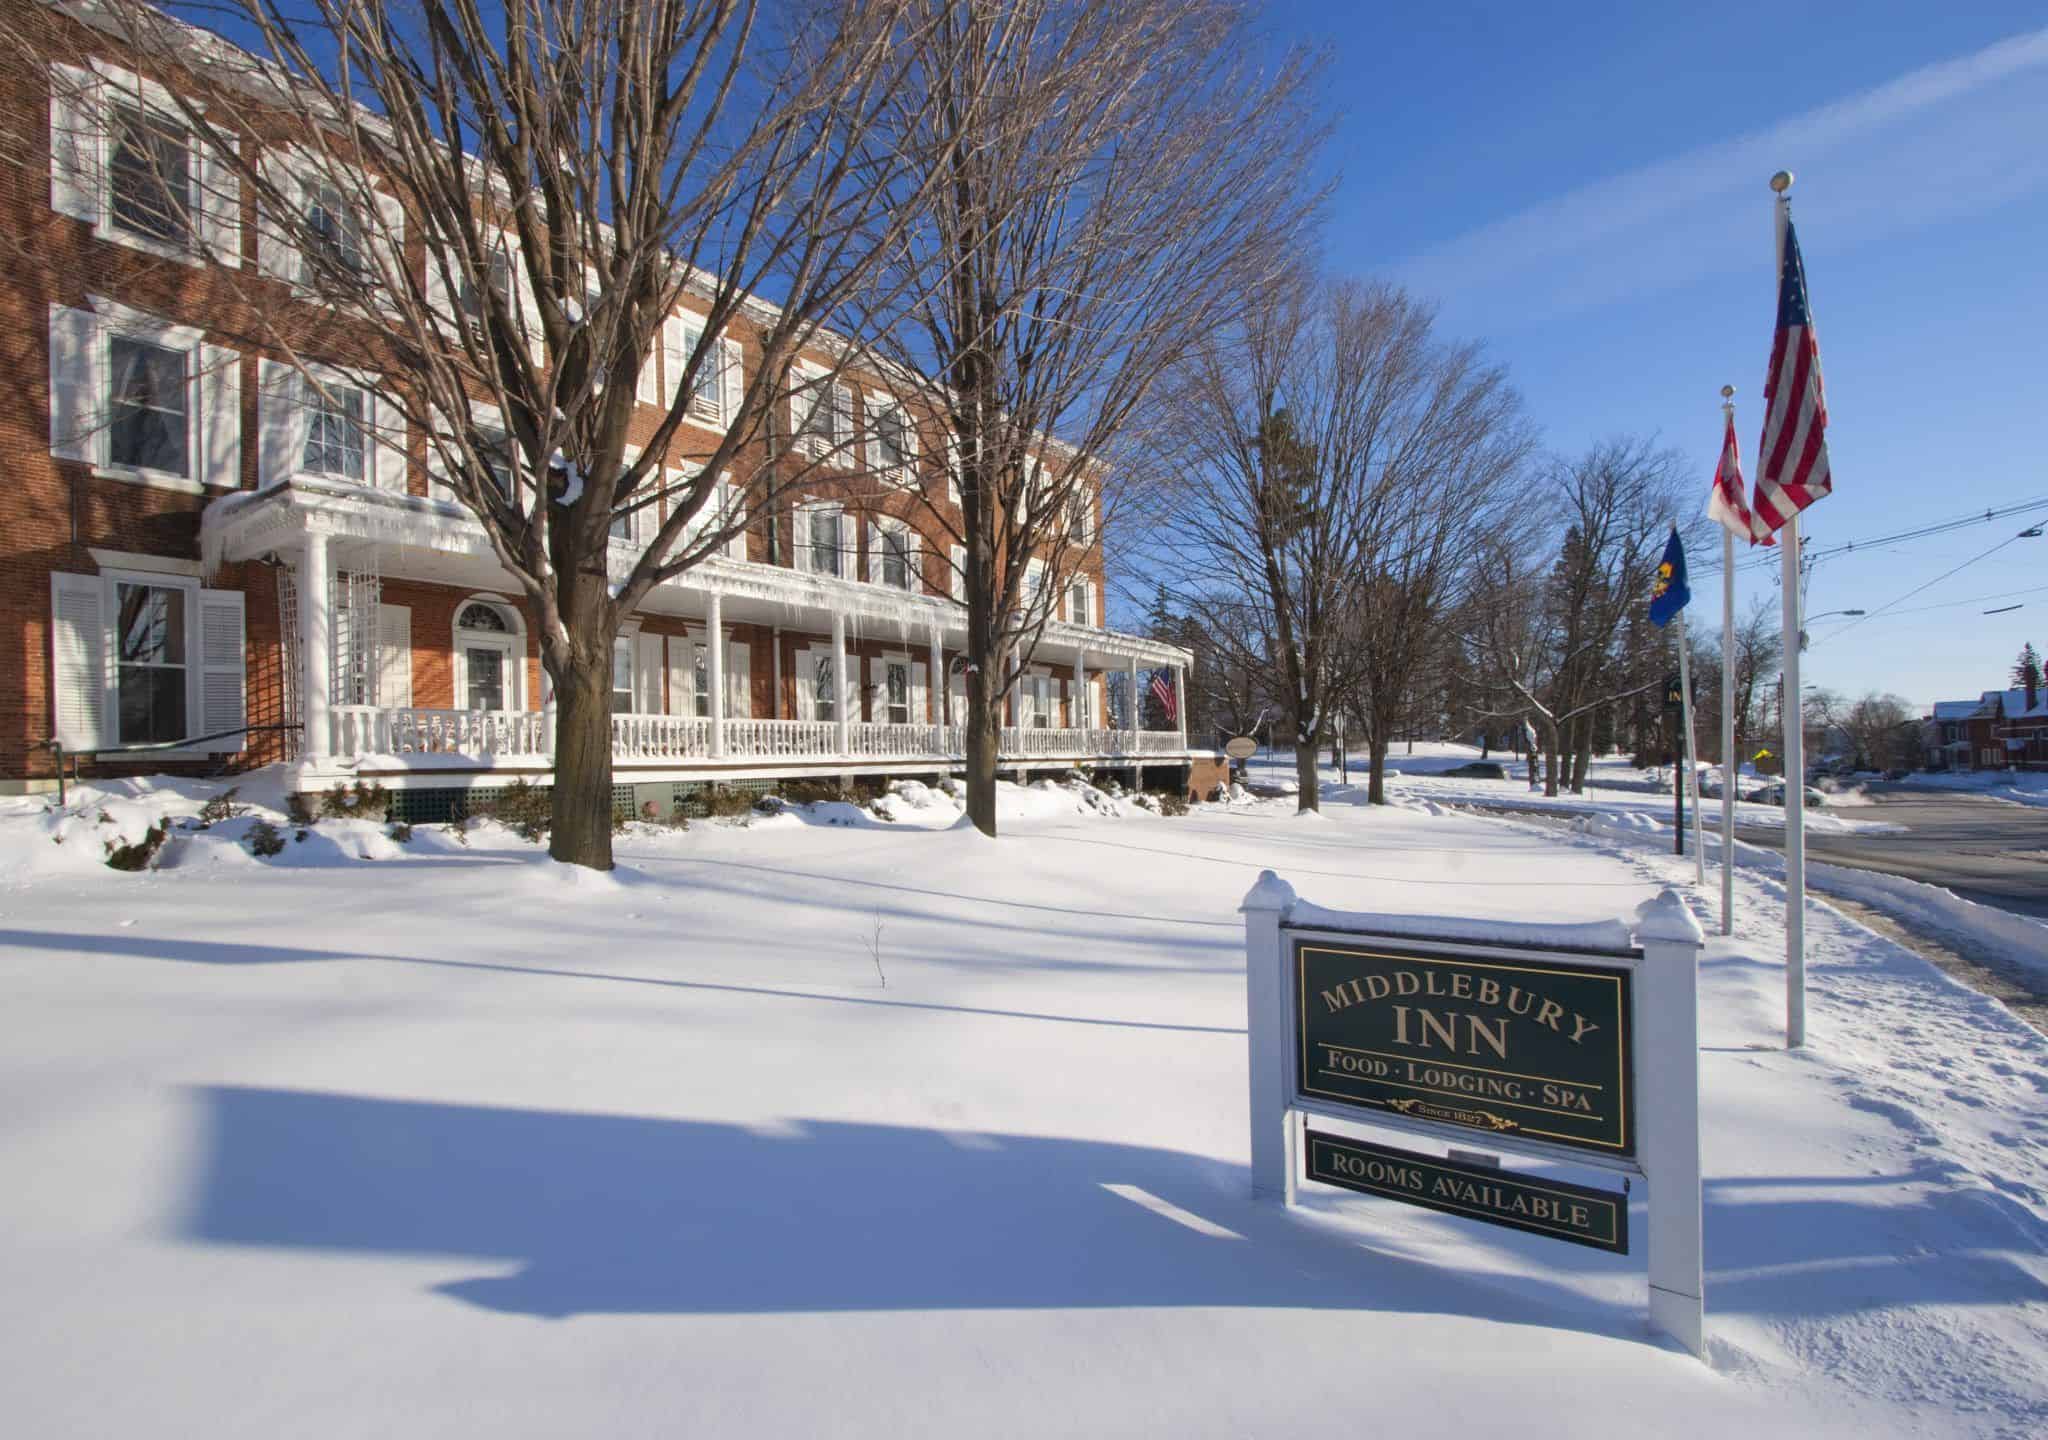 Middlebury Inn - Winter Exterior with Sign